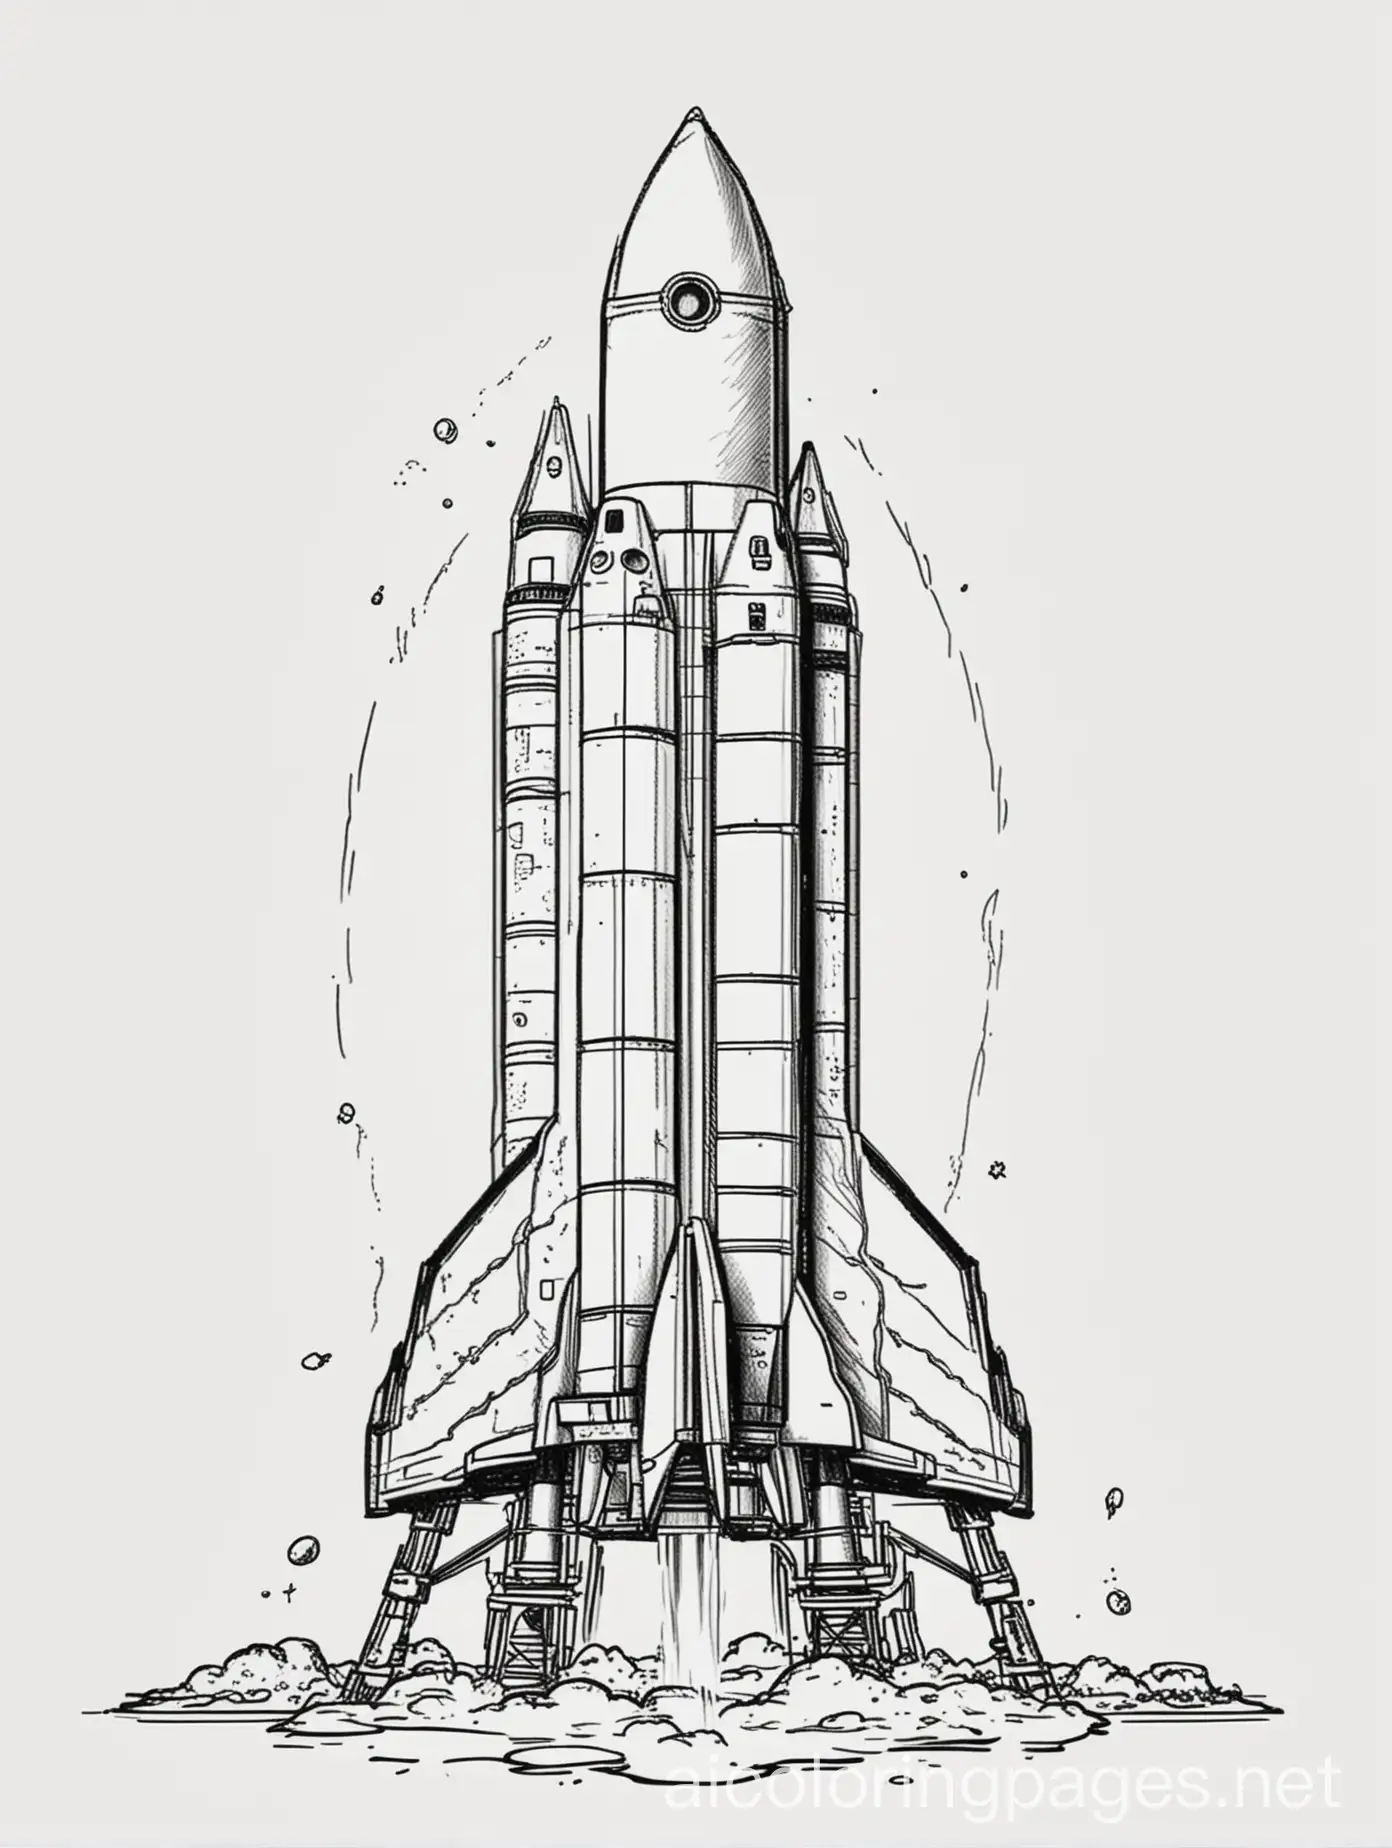 A rocket launch pad ready for lift-off, coloring page, black and white, line art, white background, Simplicity, Ample White Space. The background of the coloring page is plain white to make it easier for children to color within the lines. The outlines of all the subjects are easy to distinguish, making it simple for kids to color., Coloring Page, black and white, line art, white background, Simplicity, Ample White Space. The background of the coloring page is plain white to make it easy for young children to color within the lines. The outlines of all the subjects are easy to distinguish, making it simple for kids to color without too much difficulty